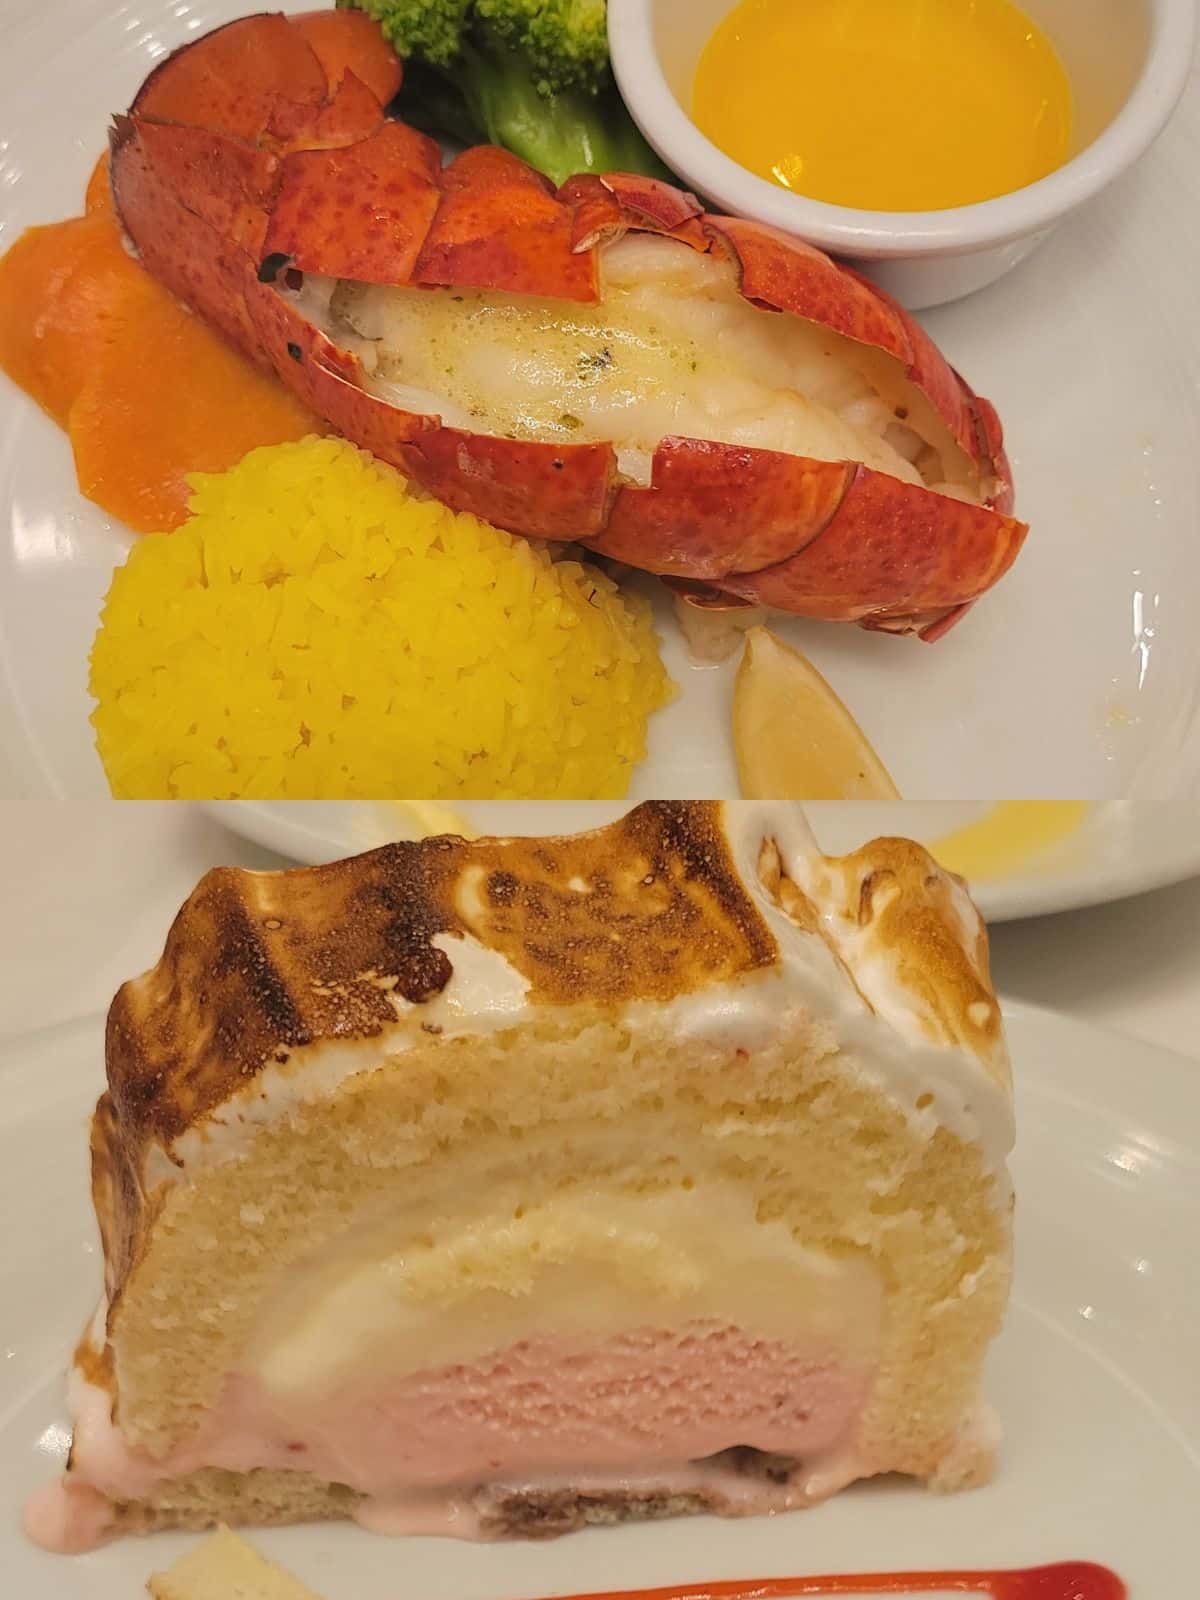 Two photos: Baked Alaska and a plate of a lobster tail, rice, a dish of butter and some veggies. 